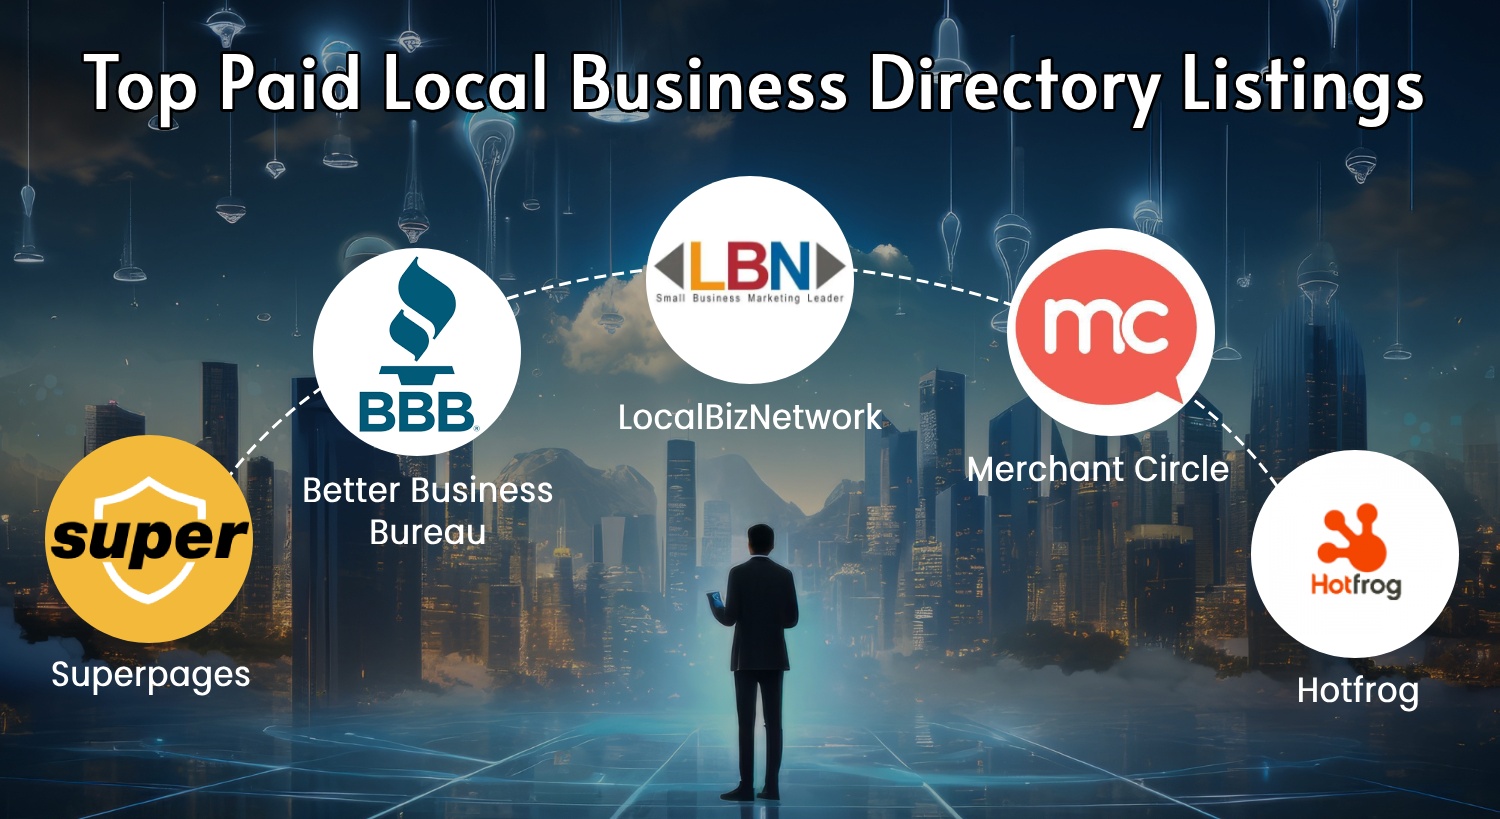 Premium Business Directories That Deliver Results with Minimal Expense